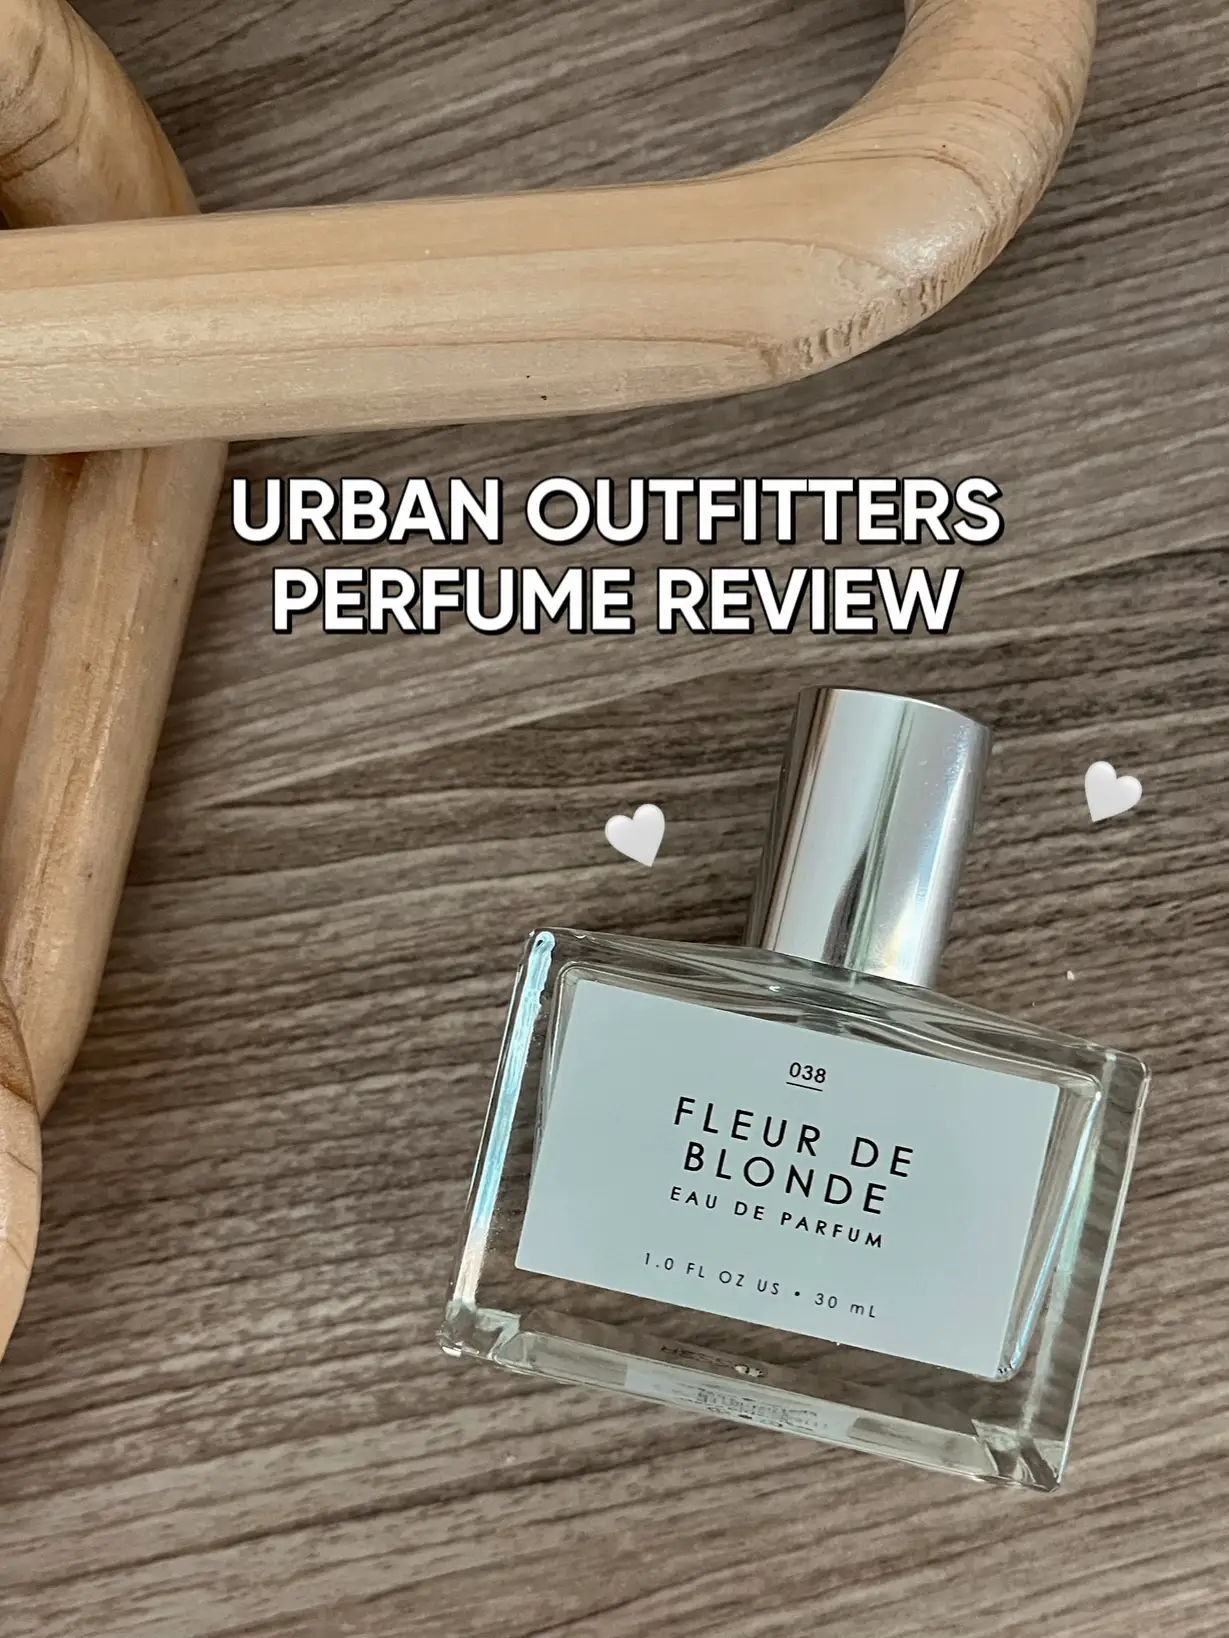 Perfume Review You Men Louis Vuitton 👨🏻 🫶🏻💜, Gallery posted by  Review.tingtong